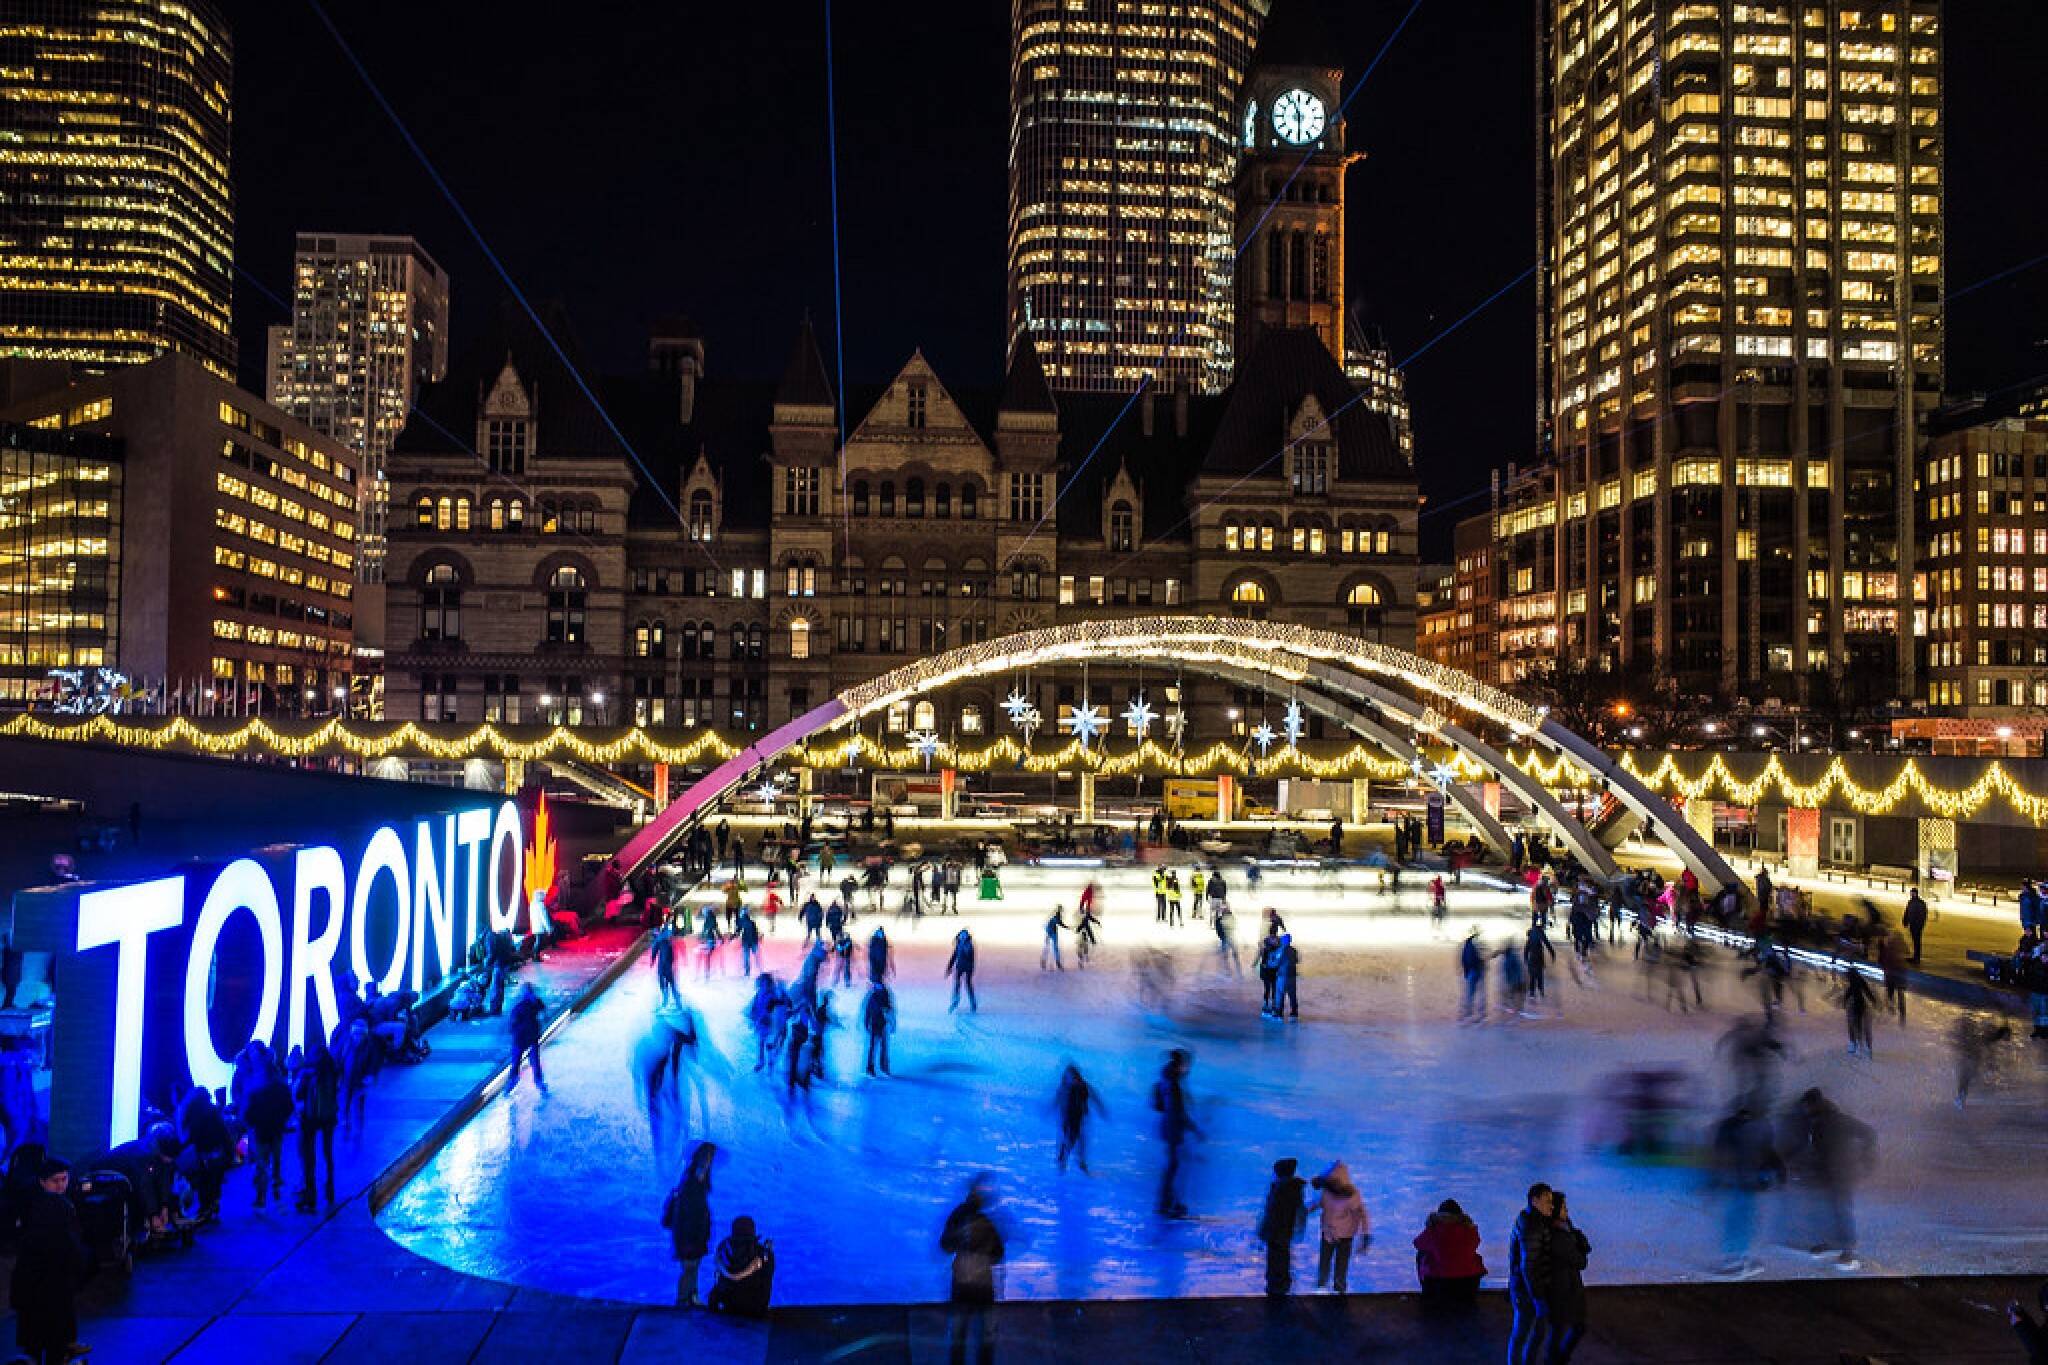 5 things to do in Toronto today